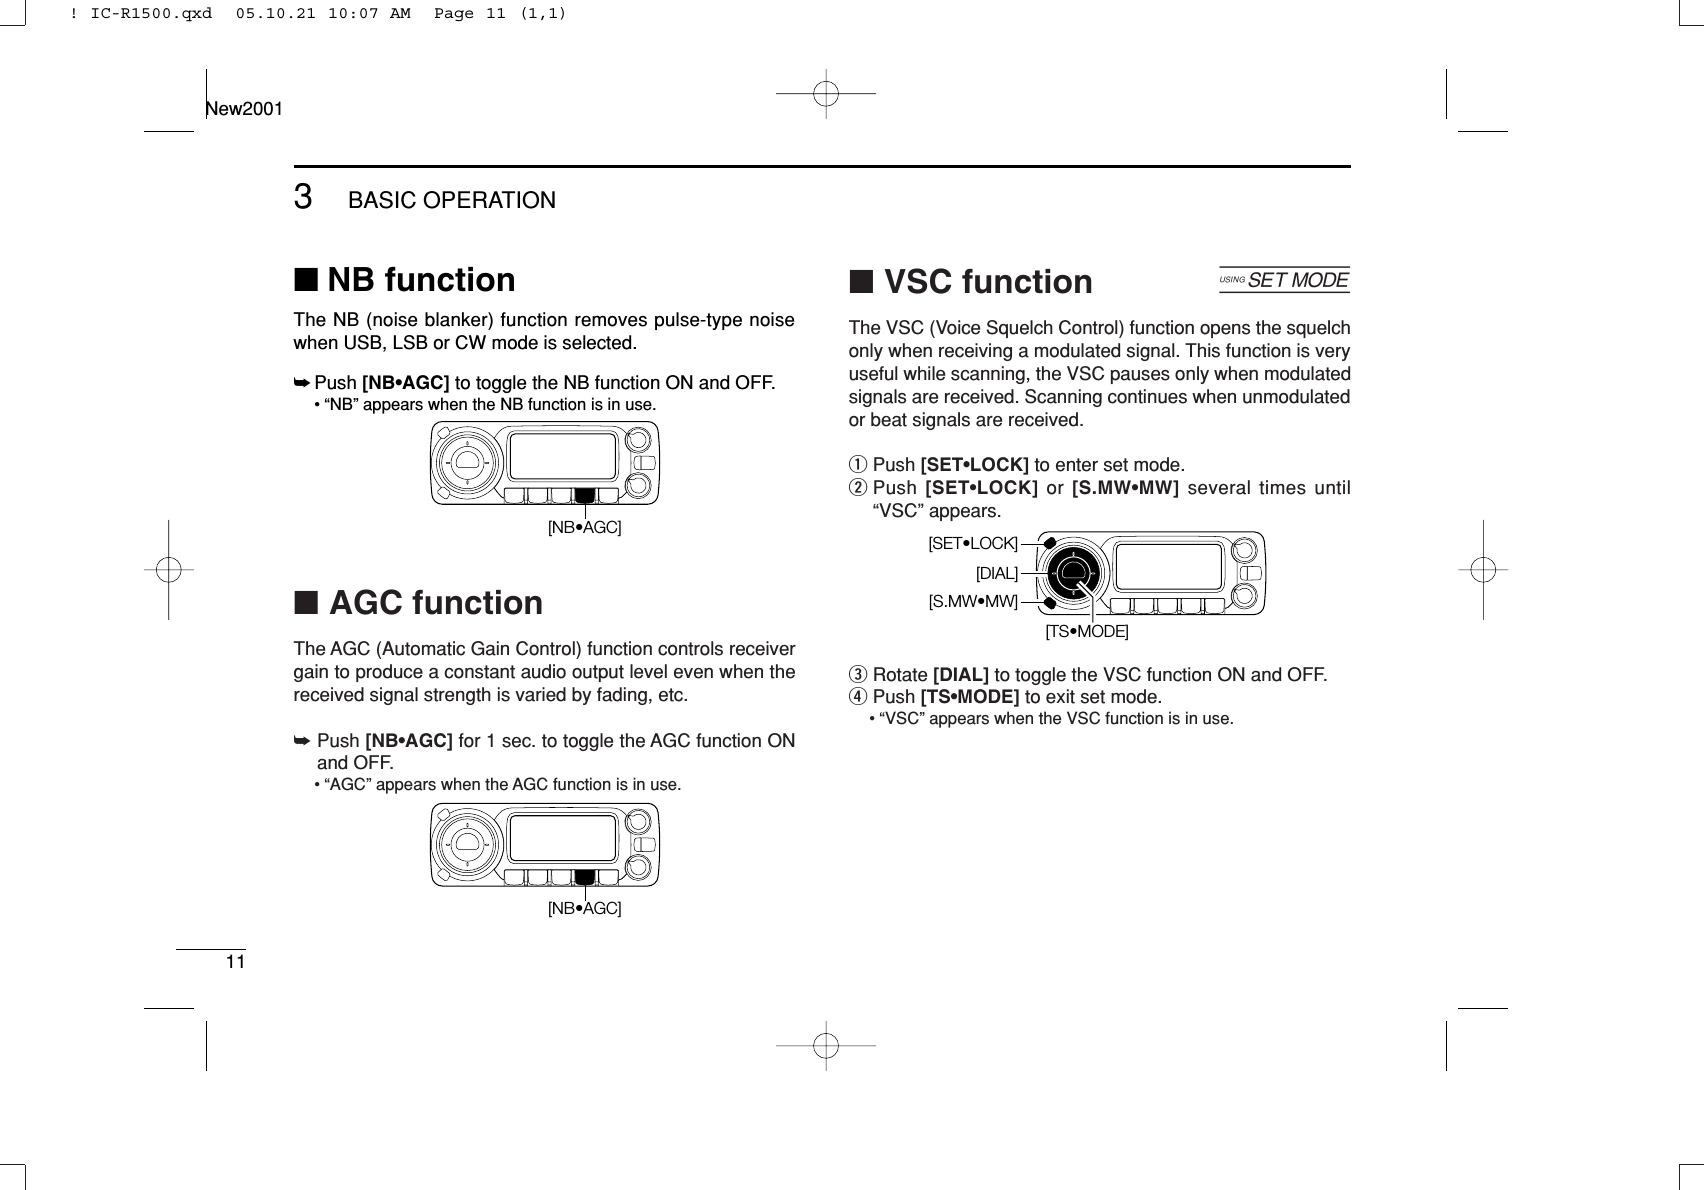 113BASIC OPERATIONNew2001■NB functionThe NB (noise blanker) function removes pulse-type noisewhen USB, LSB or CW mode is selected.➥Push [NB•AGC] to toggle the NB function ON and OFF.• “NB” appears when the NB function is in use.■AGC functionThe AGC (Automatic Gain Control) function controls receivergain to produce a constant audio output level even when thereceived signal strength is varied by fading, etc.➥Push [NB•AGC] for 1 sec. to toggle the AGC function ONand OFF.• “AGC” appears when the AGC function is in use.■VSC function [The VSC (Voice Squelch Control) function opens the squelchonly when receiving a modulated signal. This function is veryuseful while scanning, the VSC pauses only when modulatedsignals are received. Scanning continues when unmodulatedor beat signals are received.qPush [SET•LOCK] to enter set mode.wPush [SET•LOCK] or  [S.MW•MW] several times until“VSC” appears.eRotate [DIAL] to toggle the VSC function ON and OFF.rPush [TS•MODE] to exit set mode.• “VSC” appears when the VSC function is in use.[TS•MODE][DIAL][S.MW•MW][SET•LOCK][NB•AGC][NB•AGC]! IC-R1500.qxd  05.10.21 10:07 AM  Page 11 (1,1)